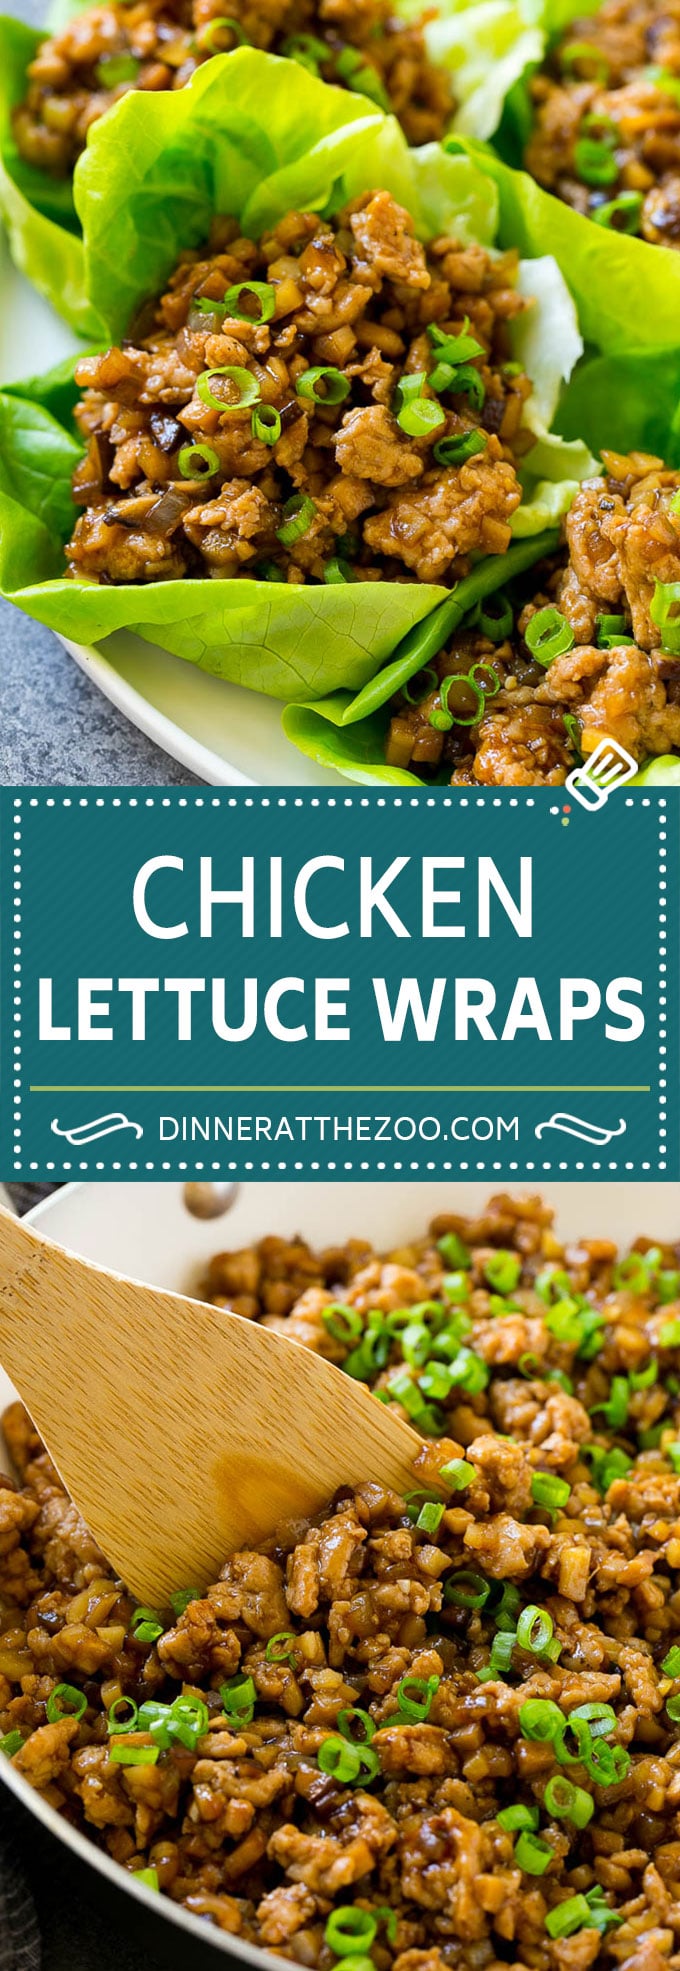 Chicken Lettuce Wraps Recipe | PF Chang's Lettuce Wraps | Chicken Lettuce Cups #lettuce #chicken #asianfood #takeout #dinner #dinneratthezoo